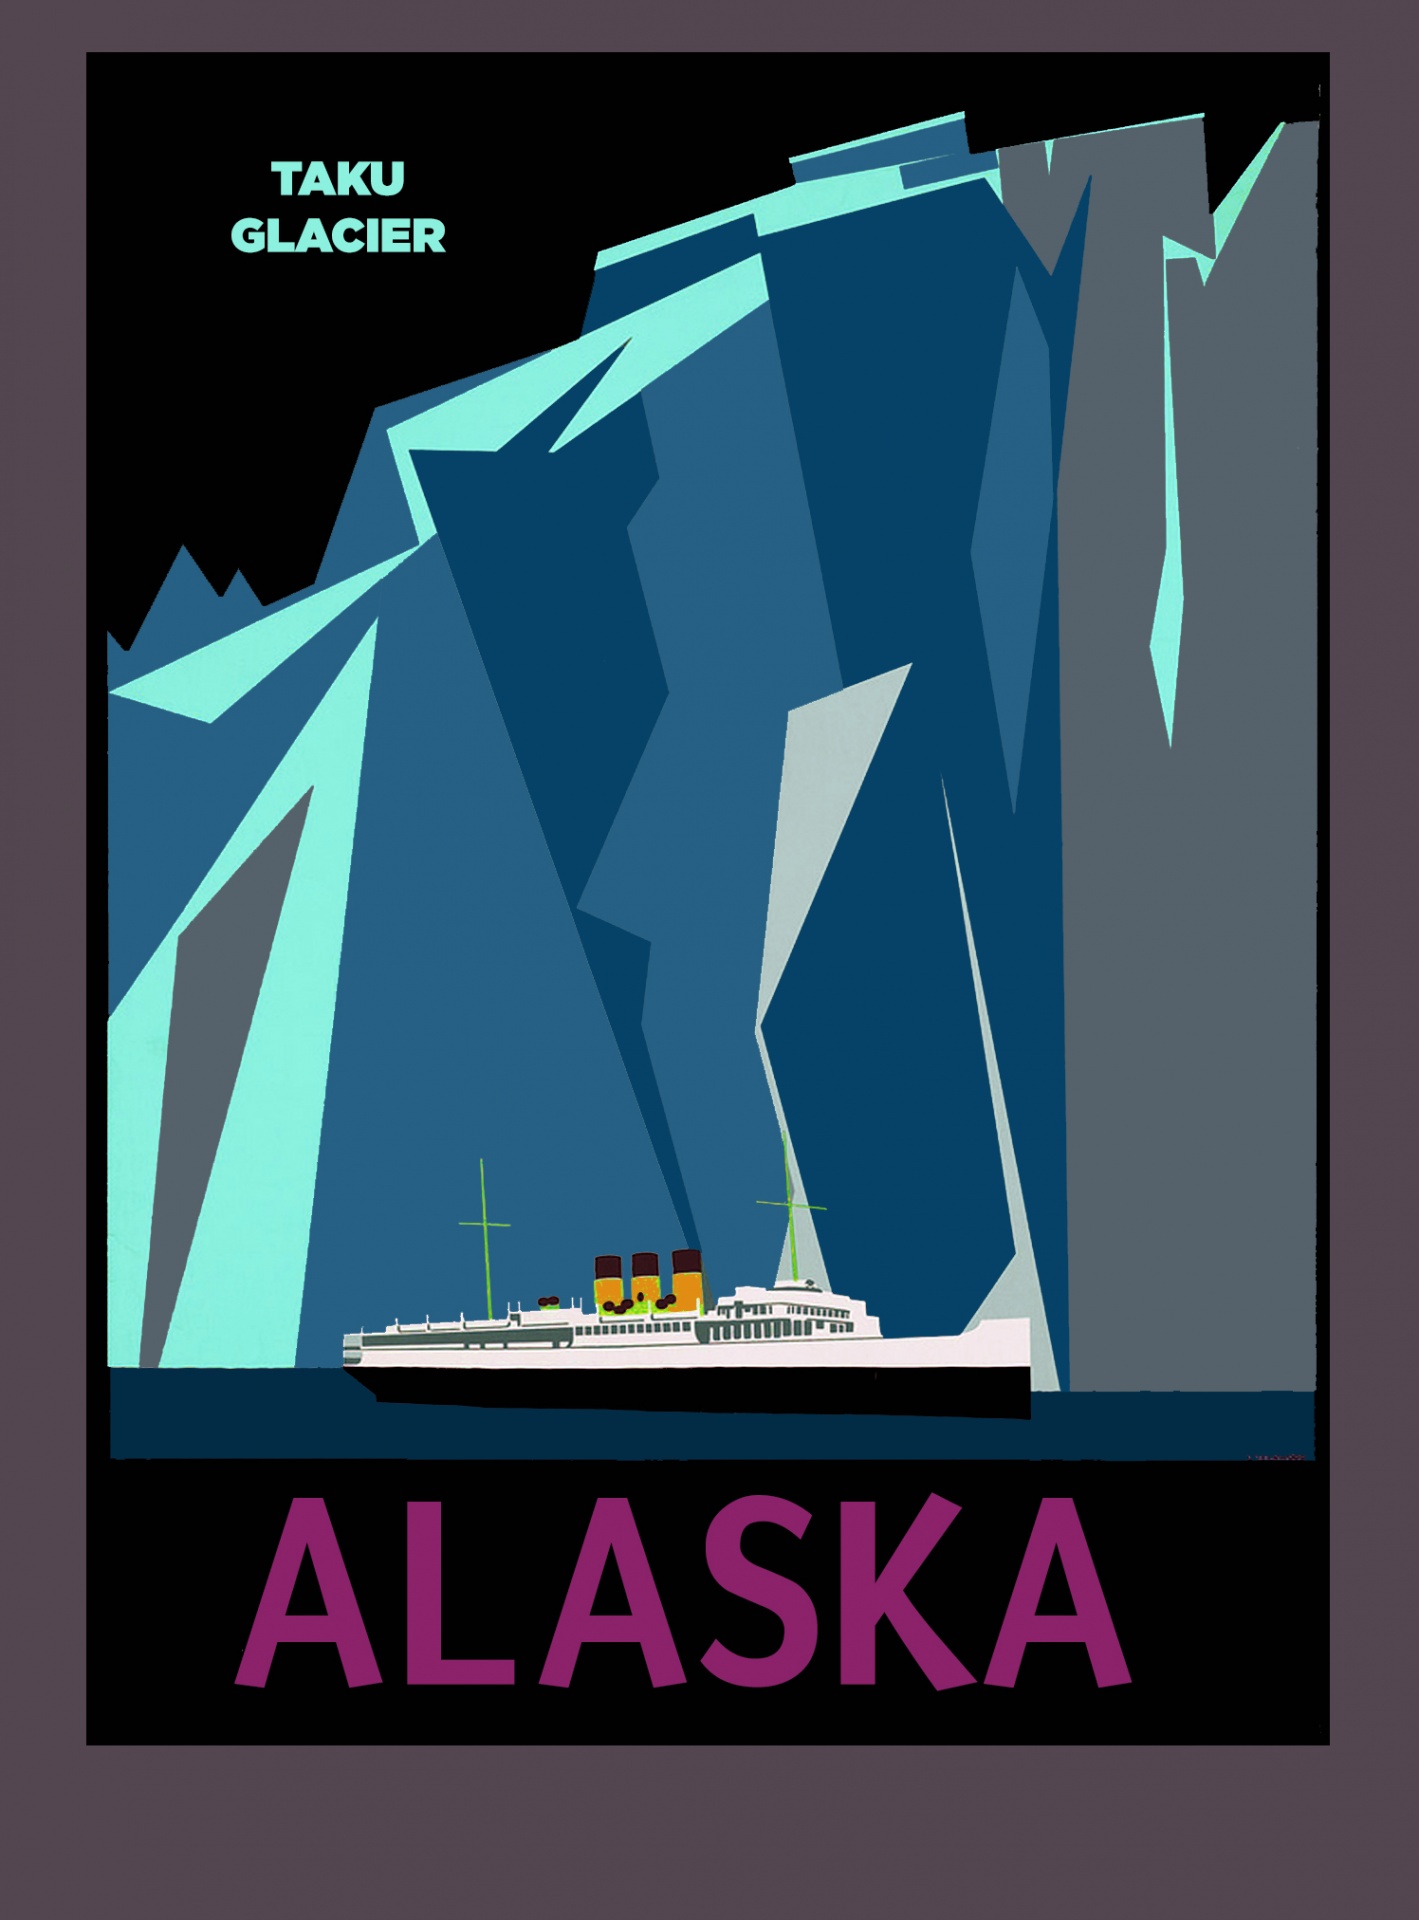 Taku Glacier in Alaska with cruise ship on a travel poster